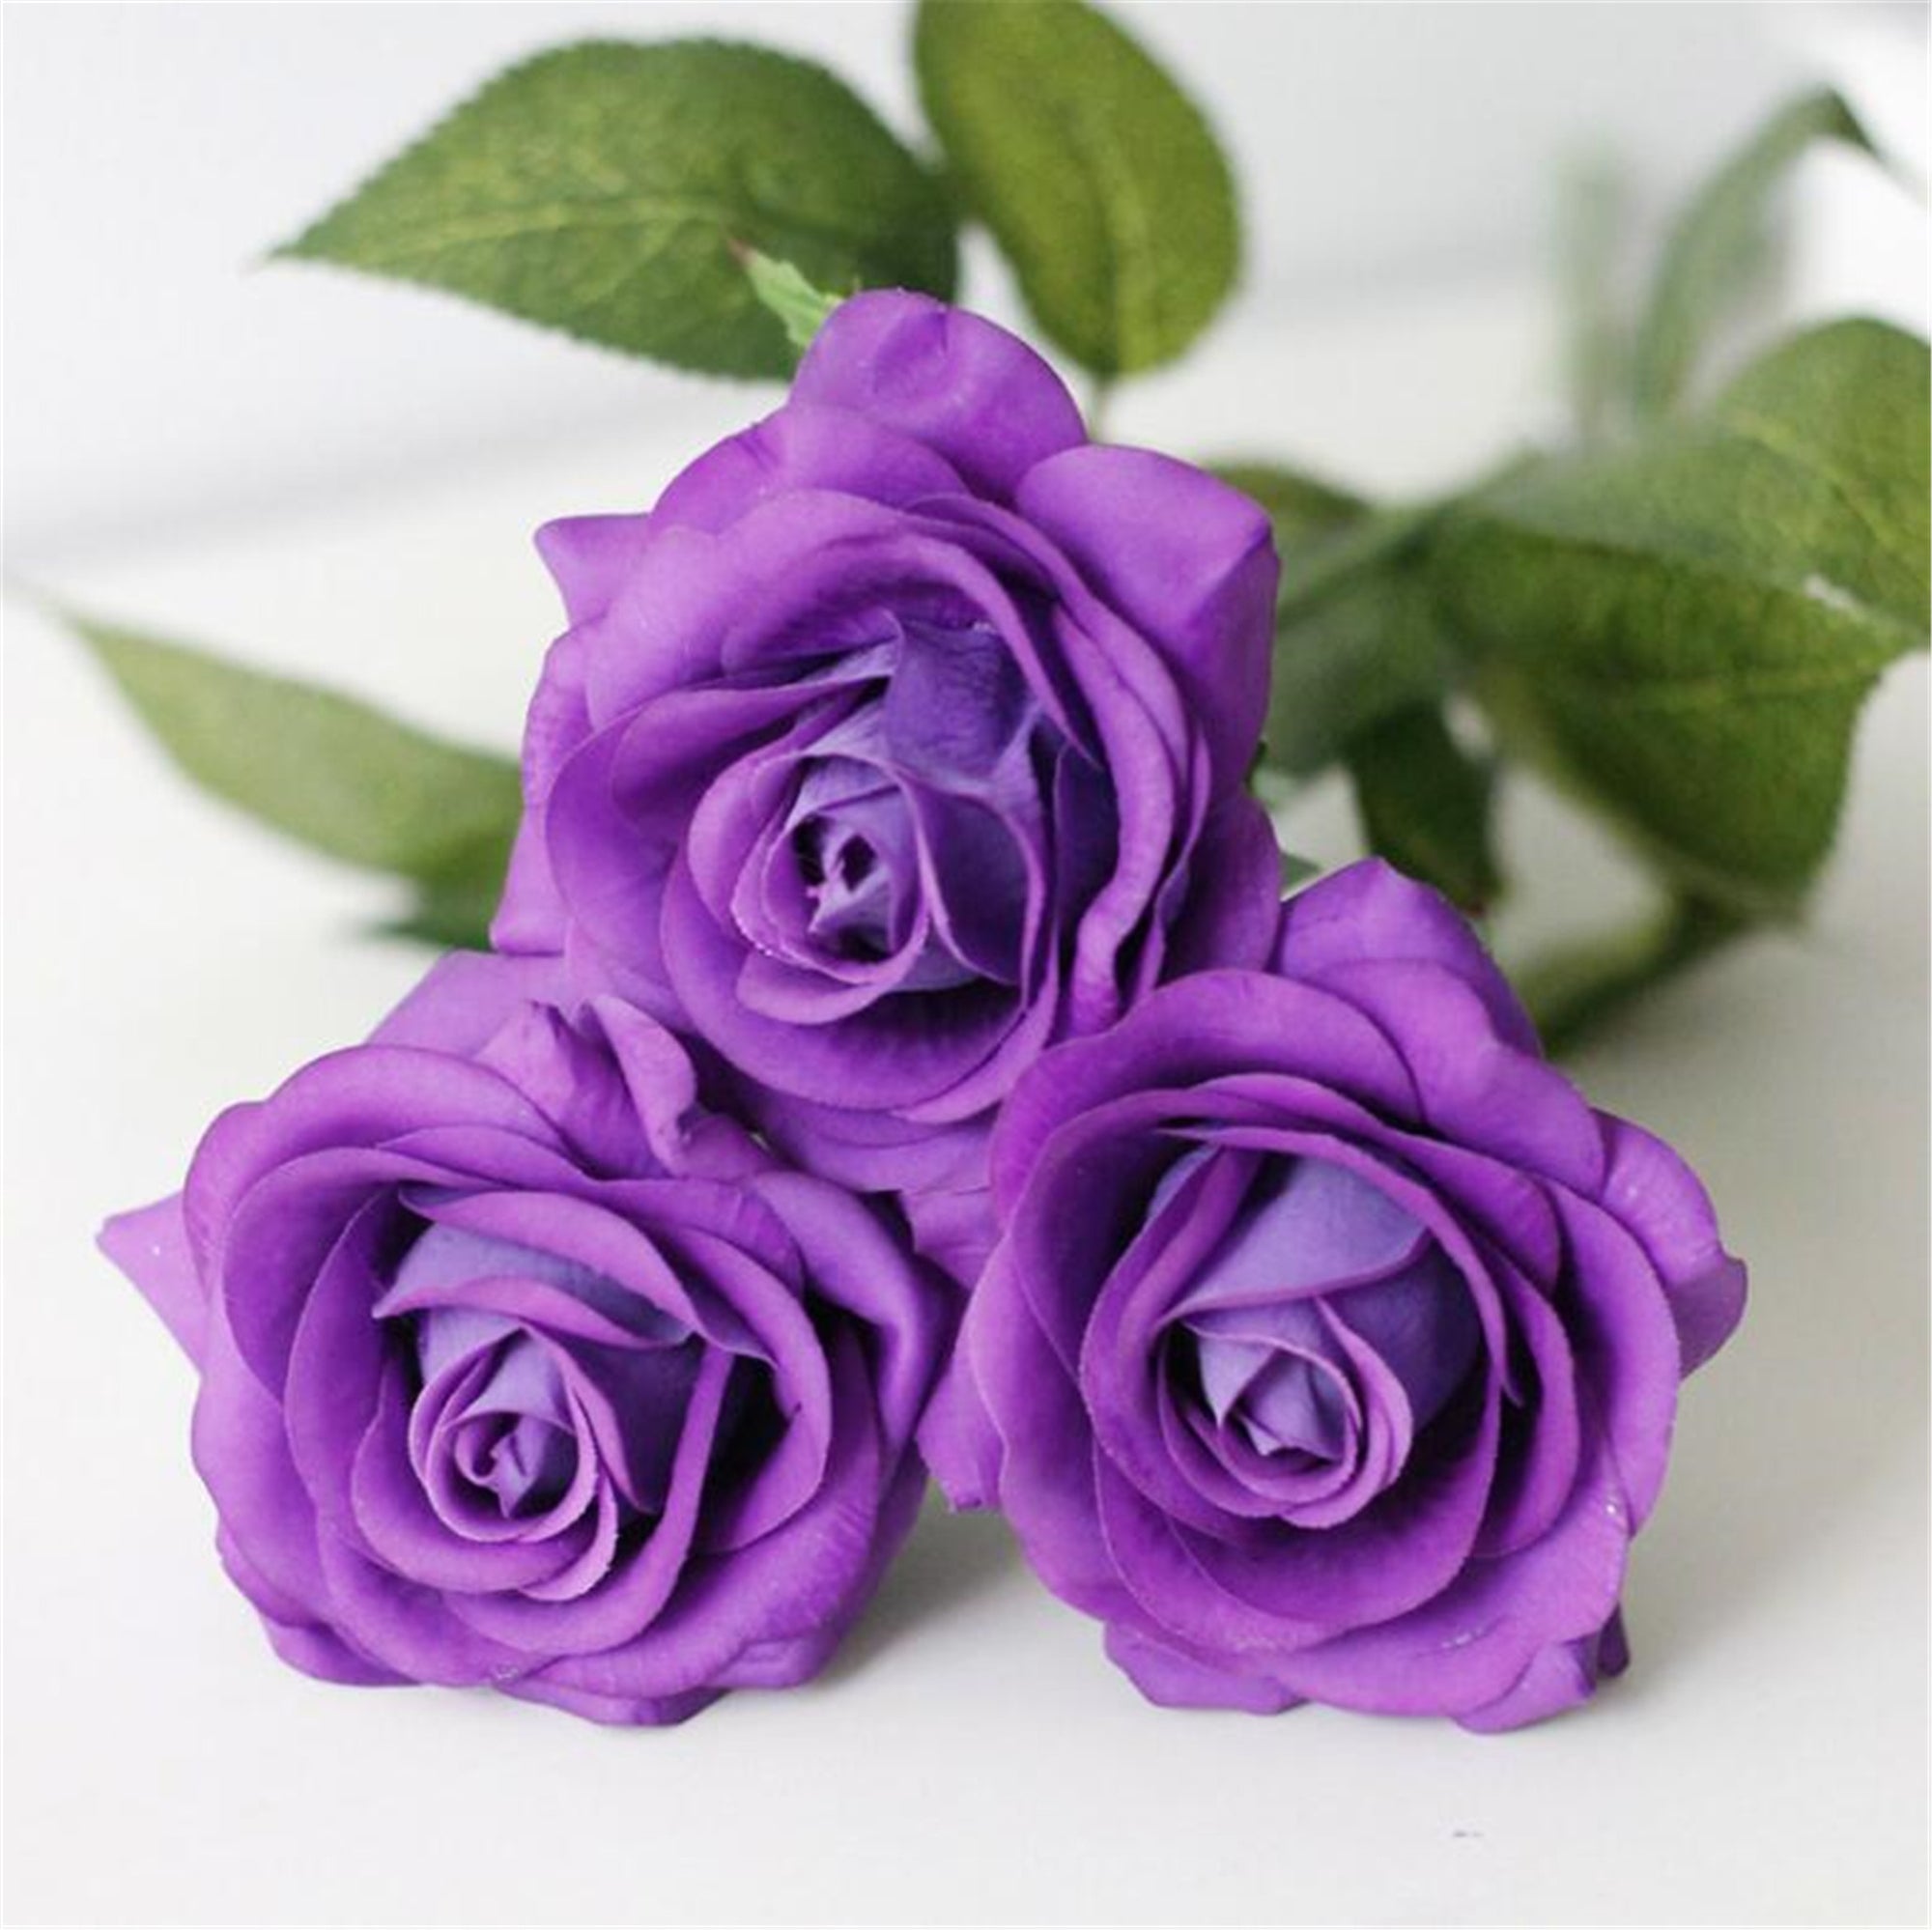 Realistic Fake Flowers Silk Latex Real Touch Roses